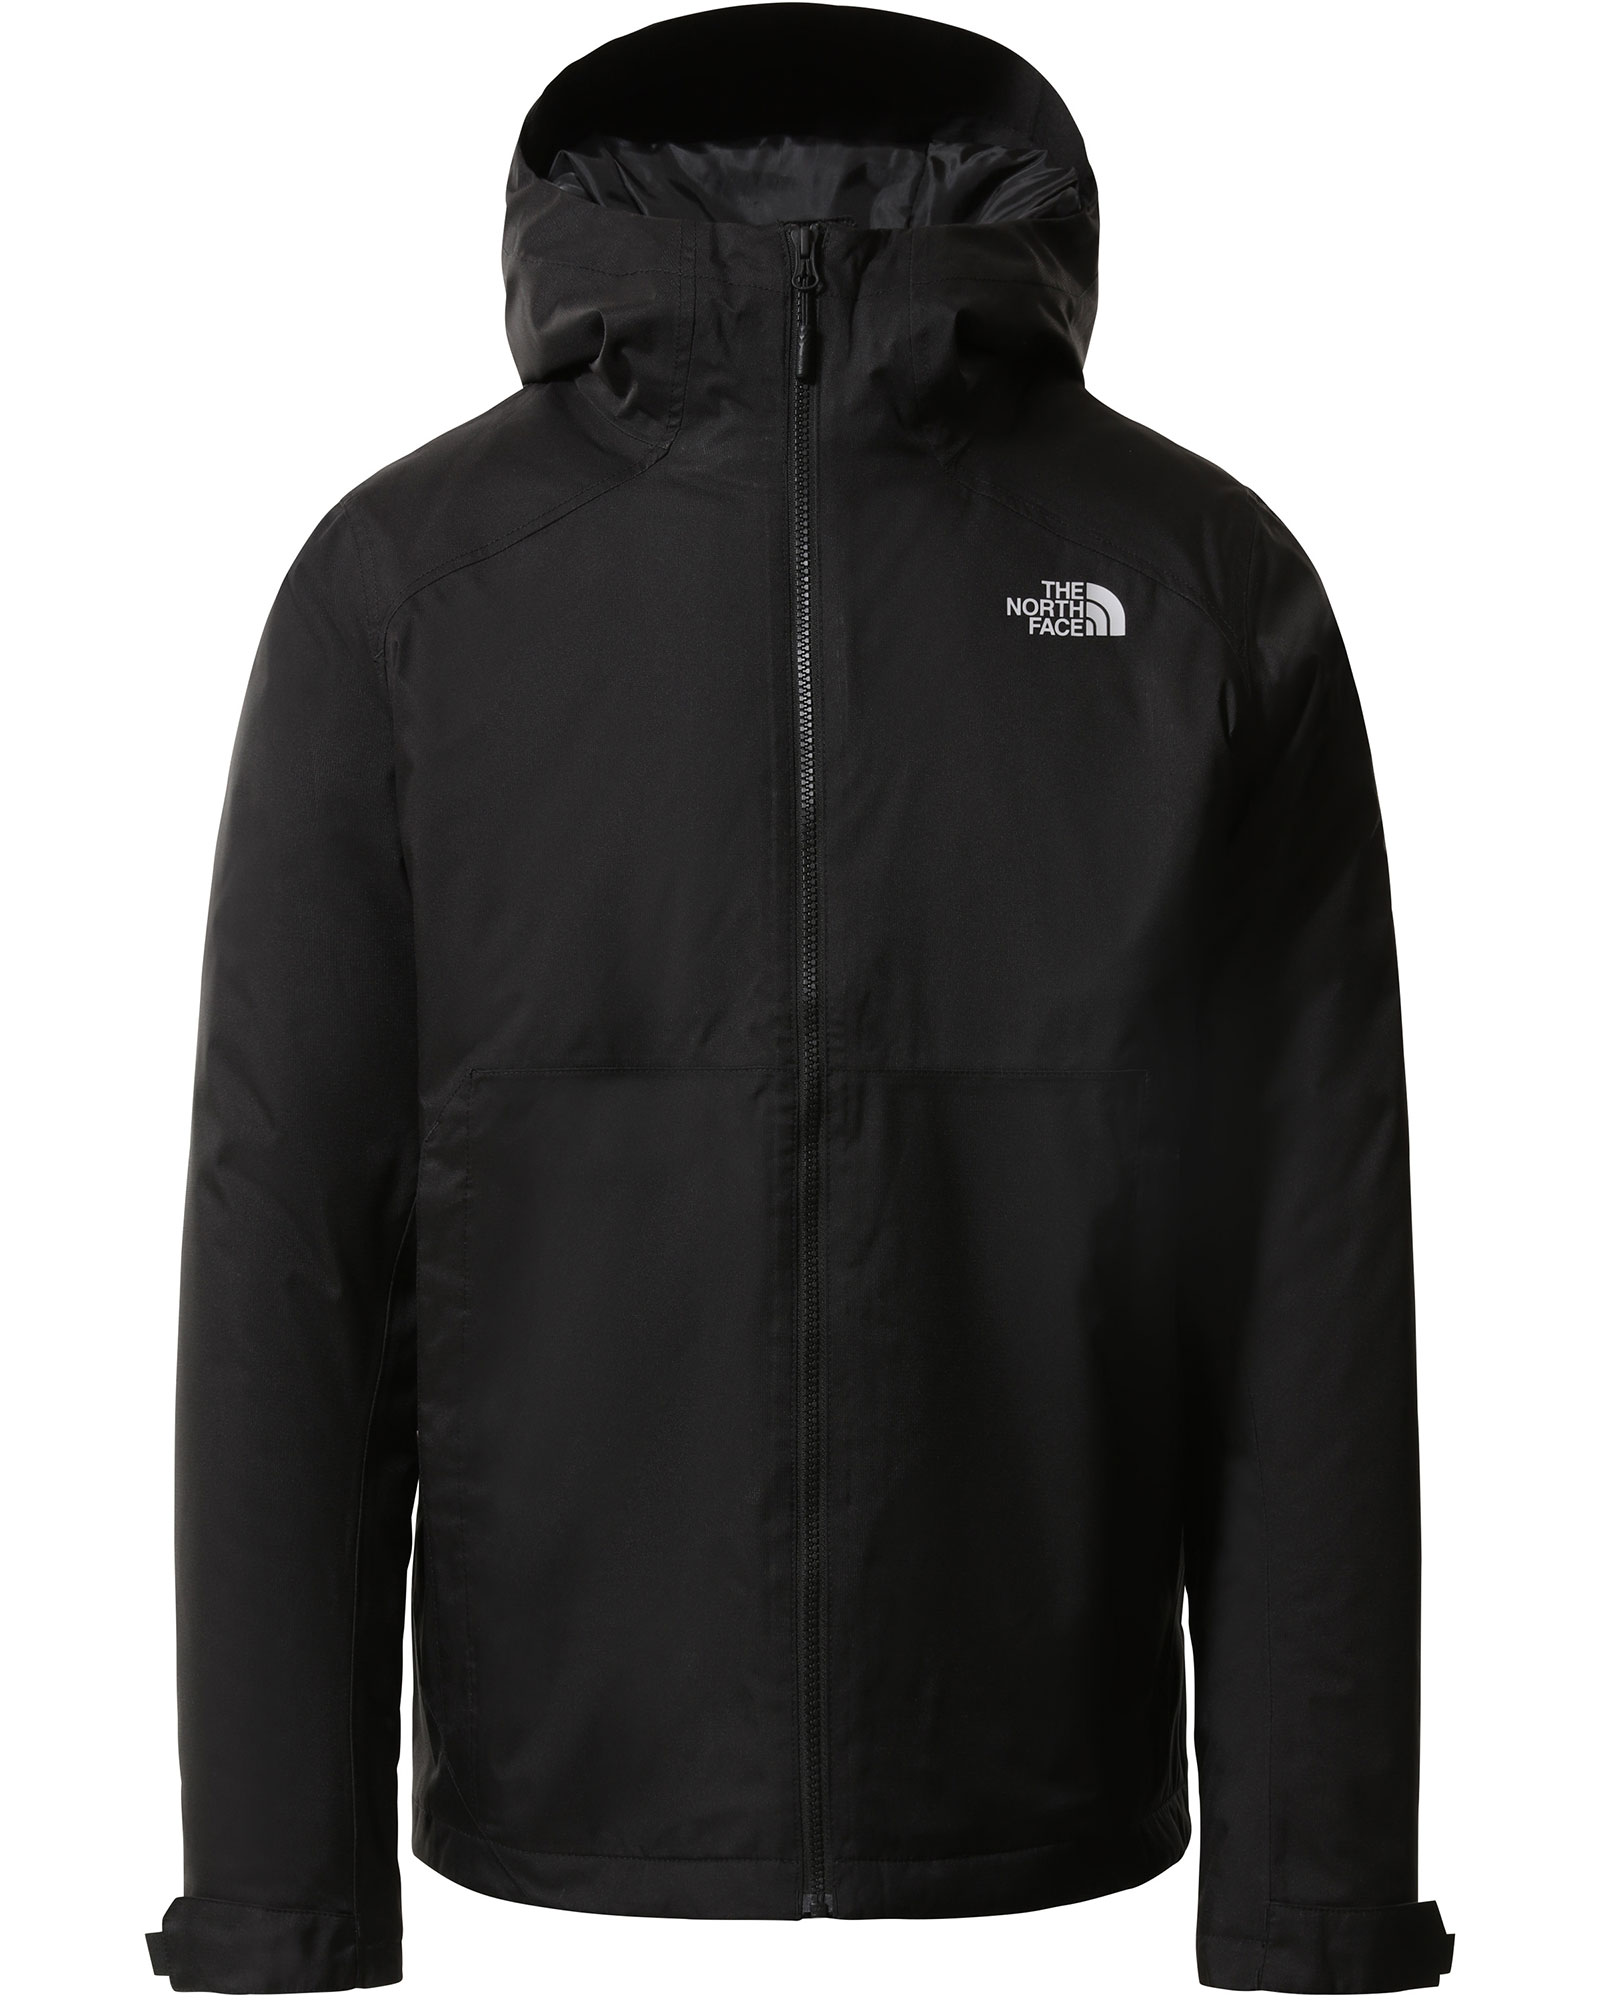 The North Face Millerton DryVent Men’s Insulated Jacket - TNF Black XL